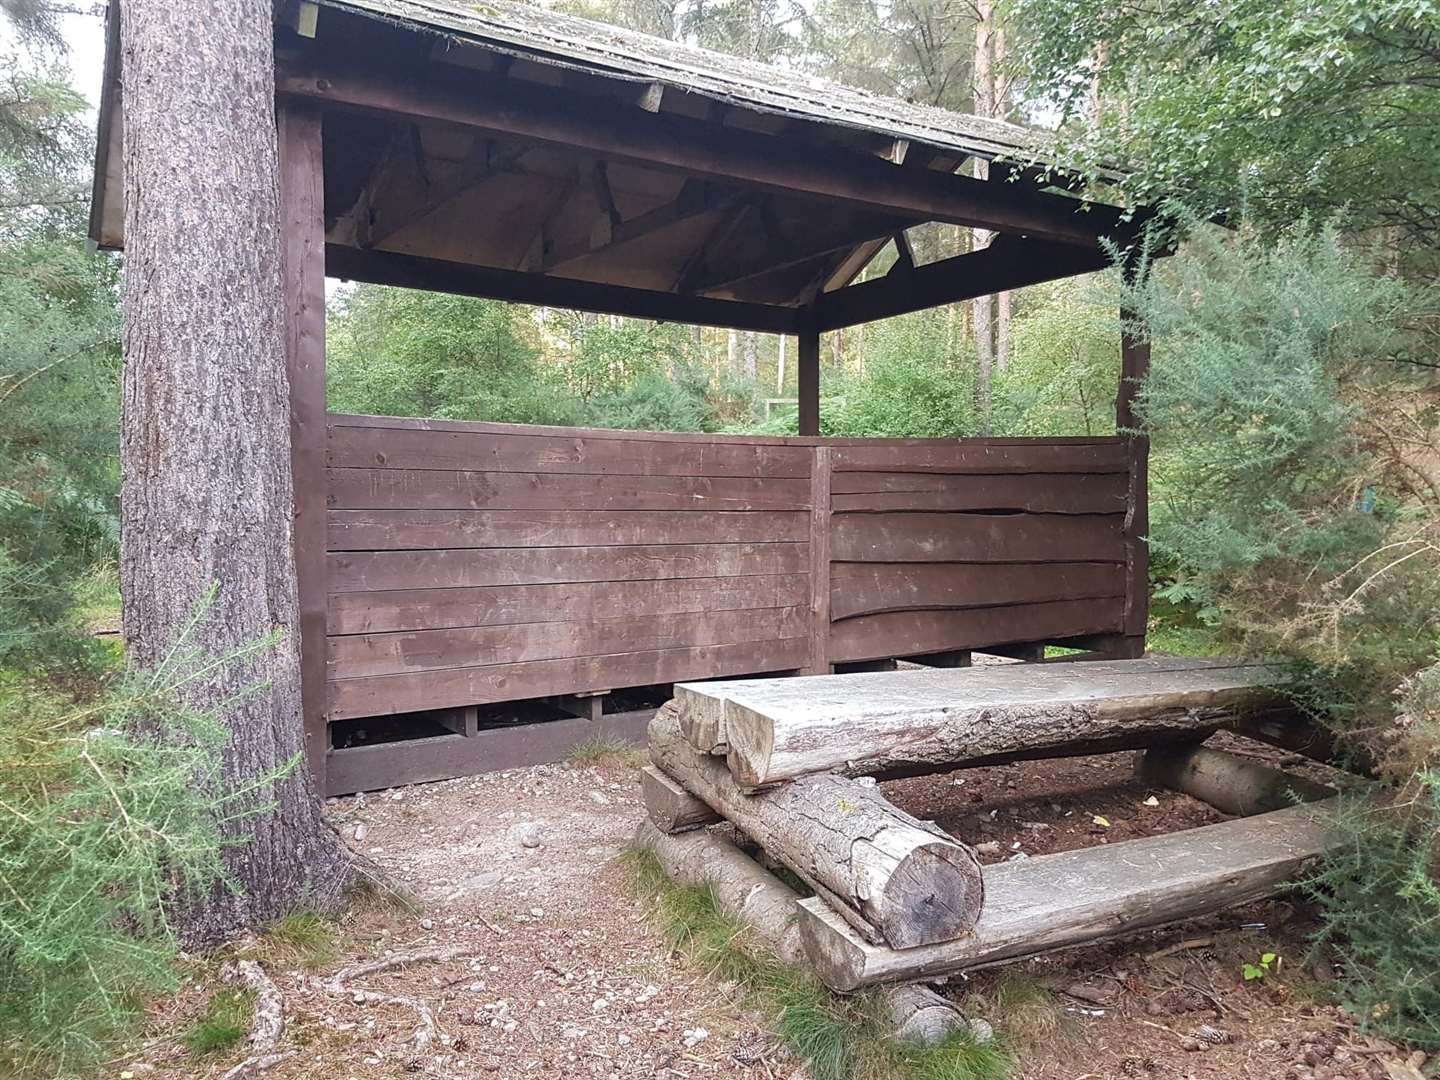 A picnic table around the back of the hut.